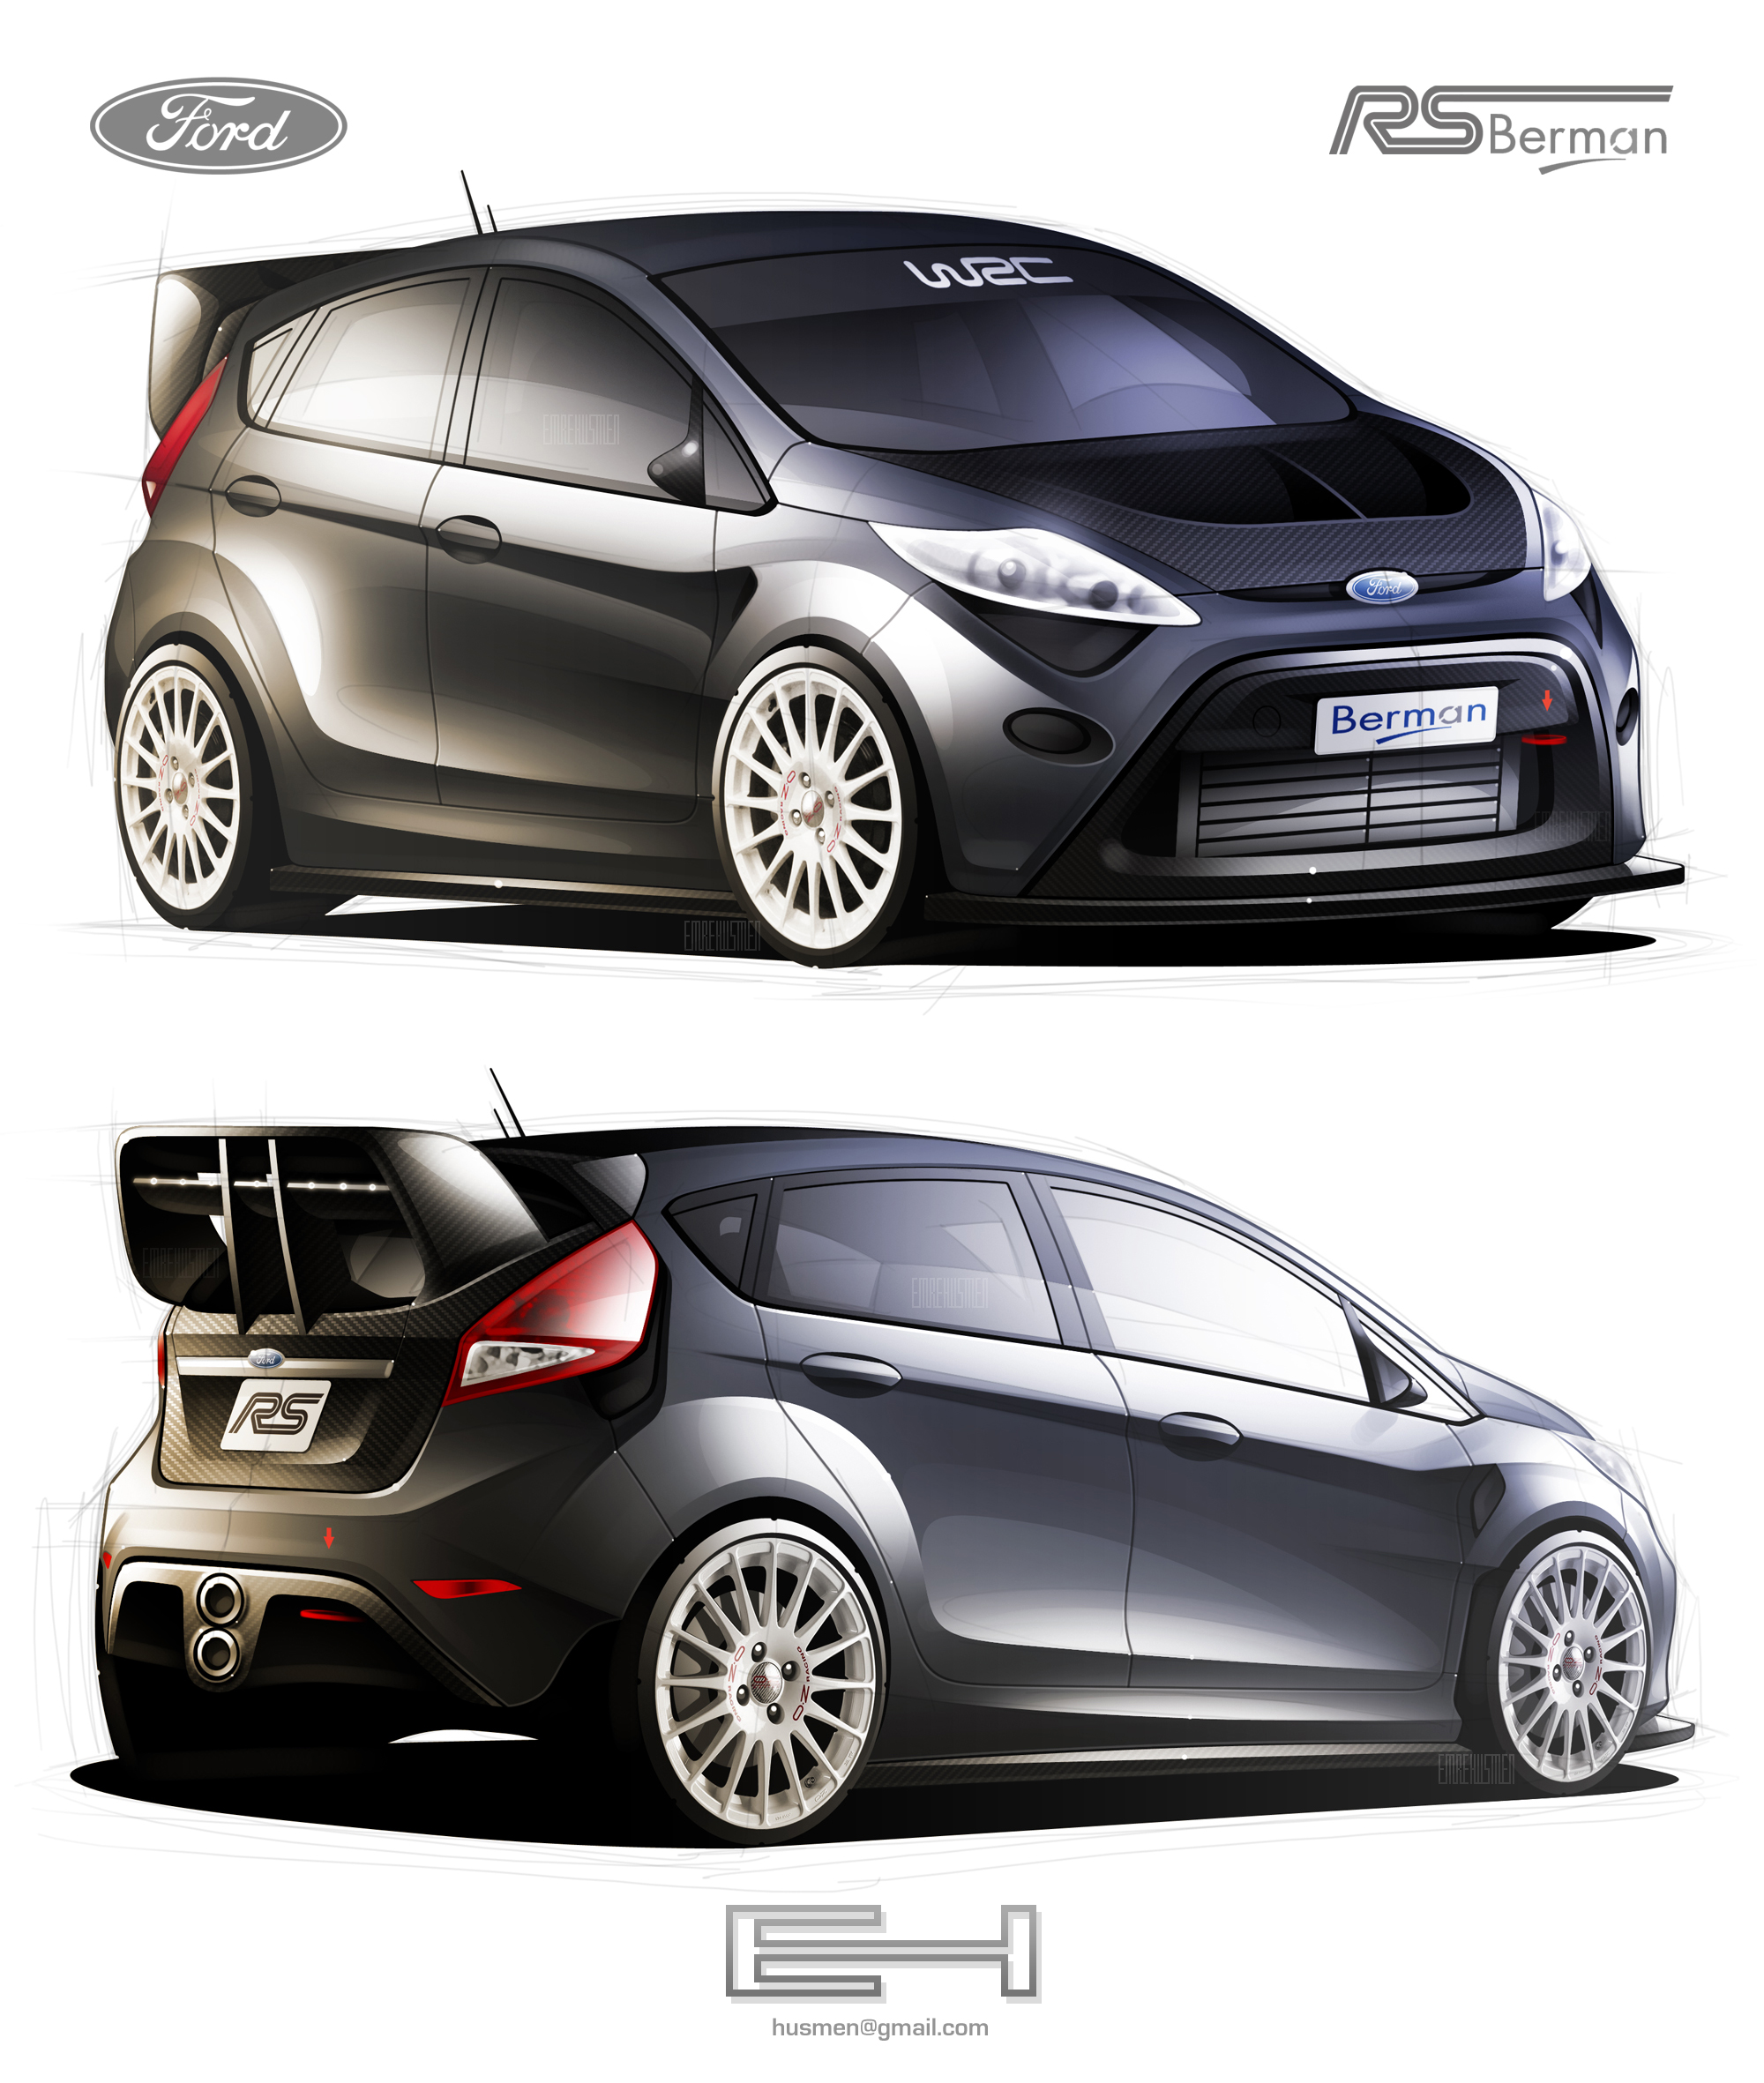 Ford Fiesta RS B by